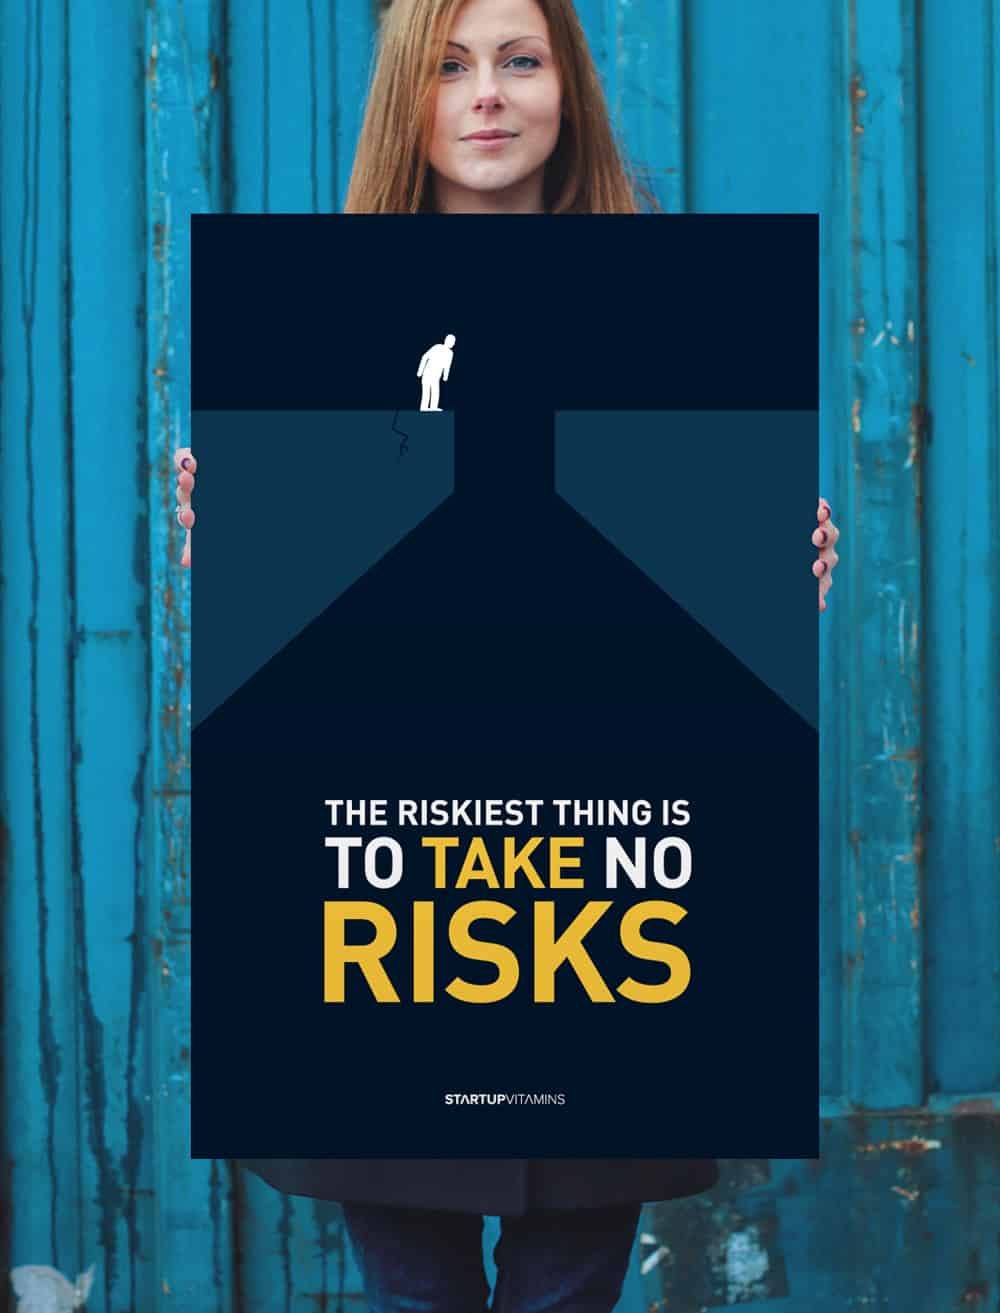 the riskiest thing is to take no risks, quote, poster about taking risks